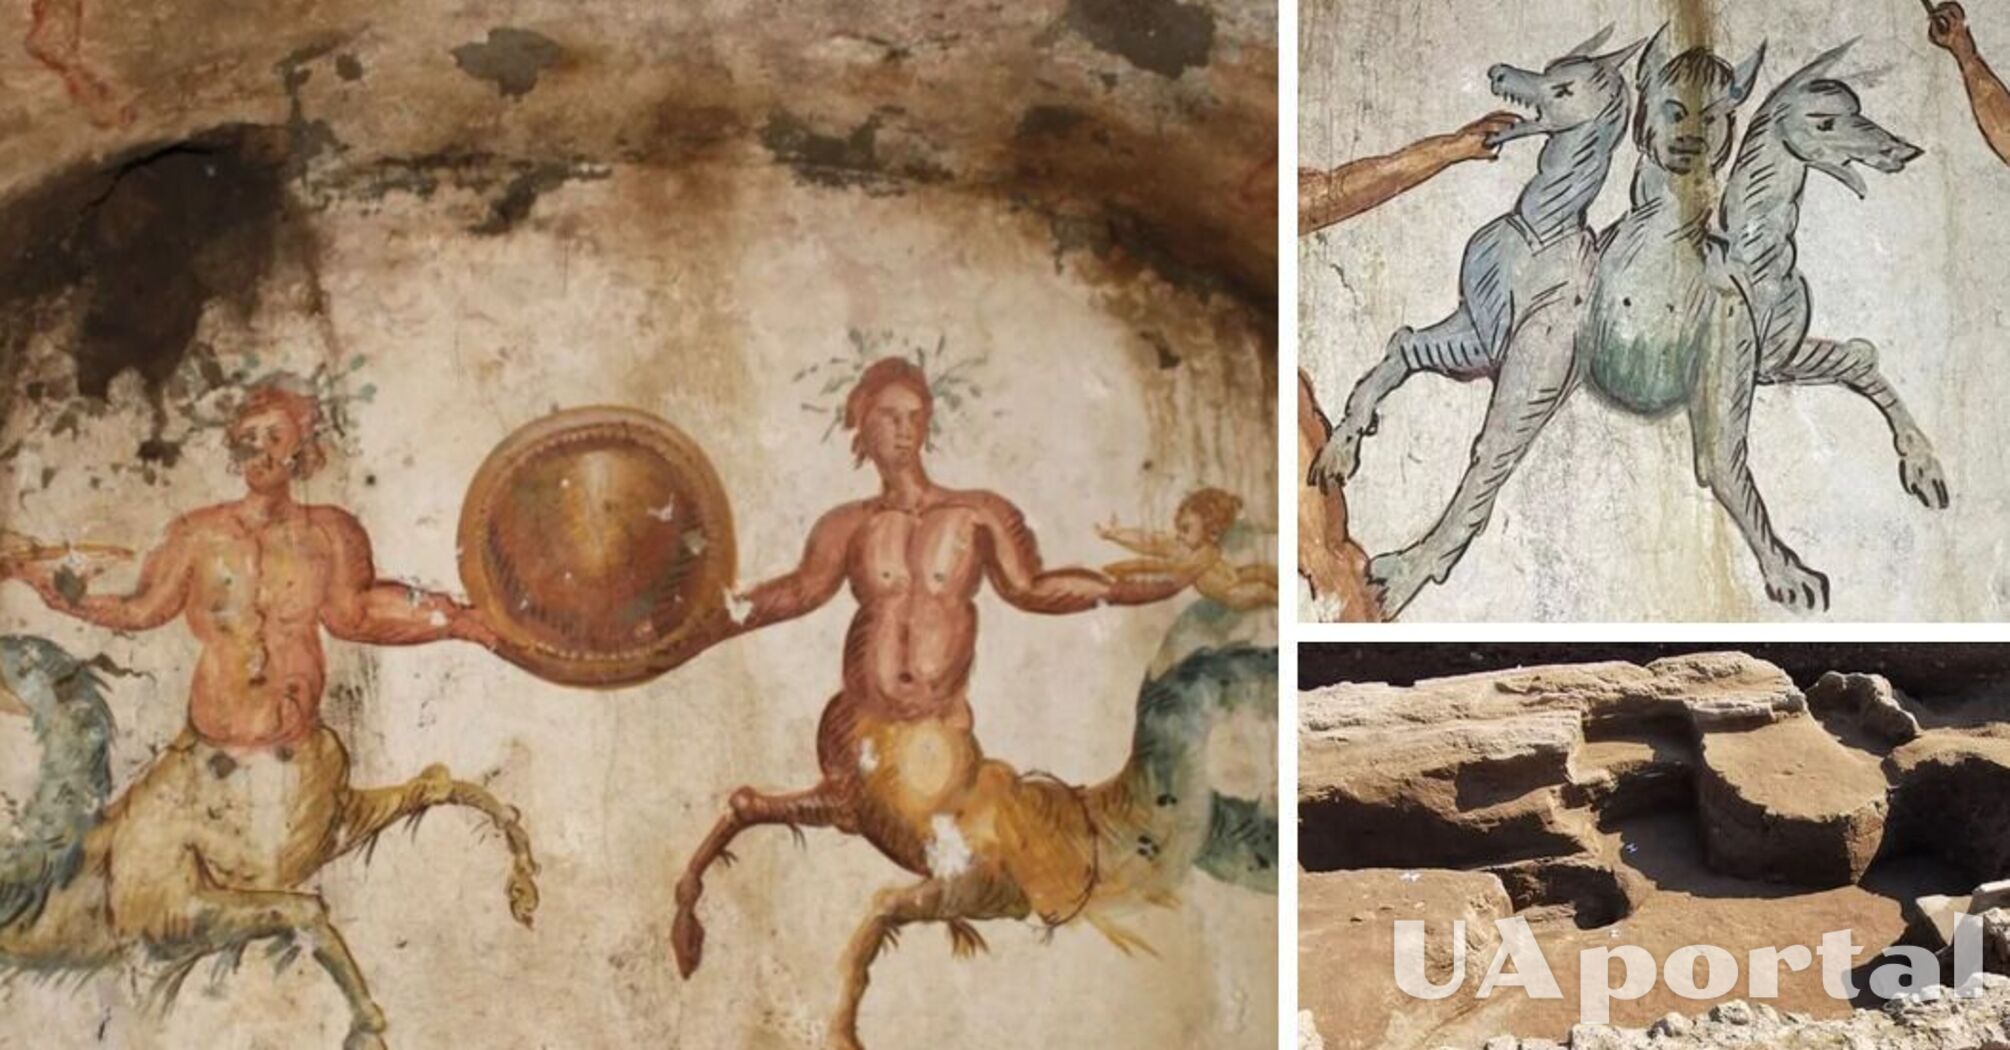 A sealed tomb with the image of Cerberus guarding the underworld found in Italy (photo)